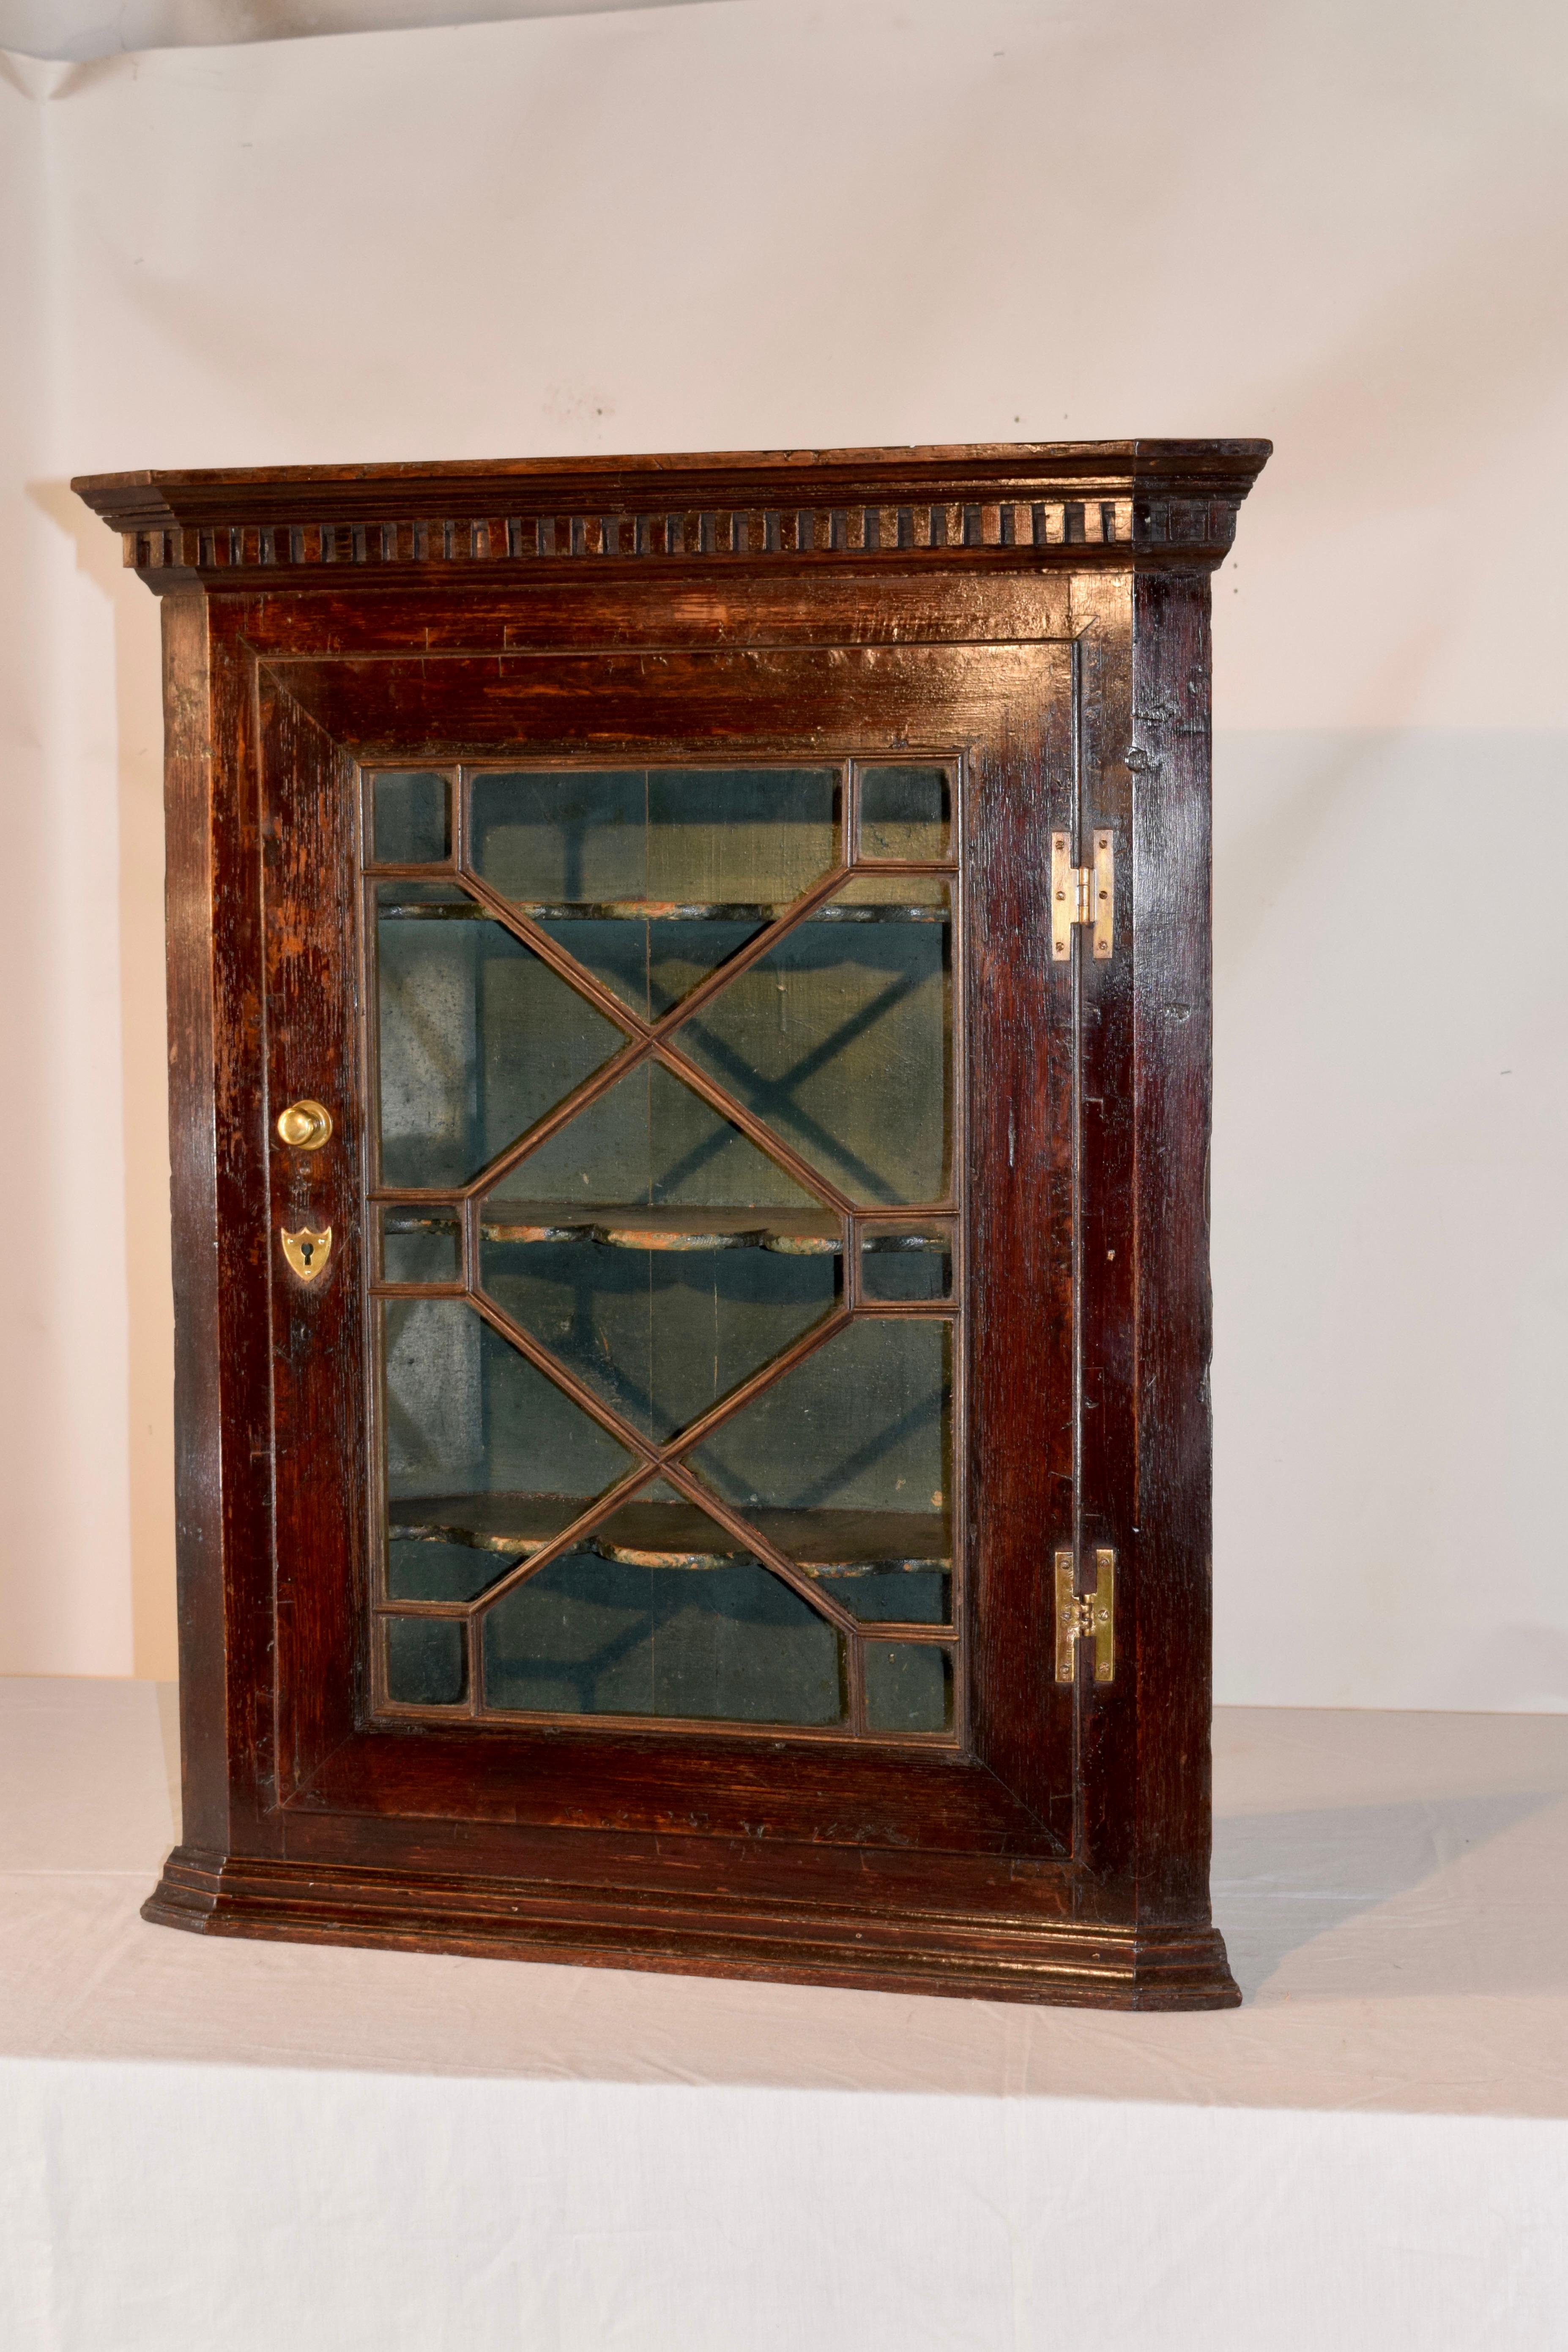 18th century wall cupboard from England made from oak. The piece has crown molding over dentil molding at the top, following down to a single door, which is glazed and opens to reveal three scalloped shelves. The interior is in what appears to be